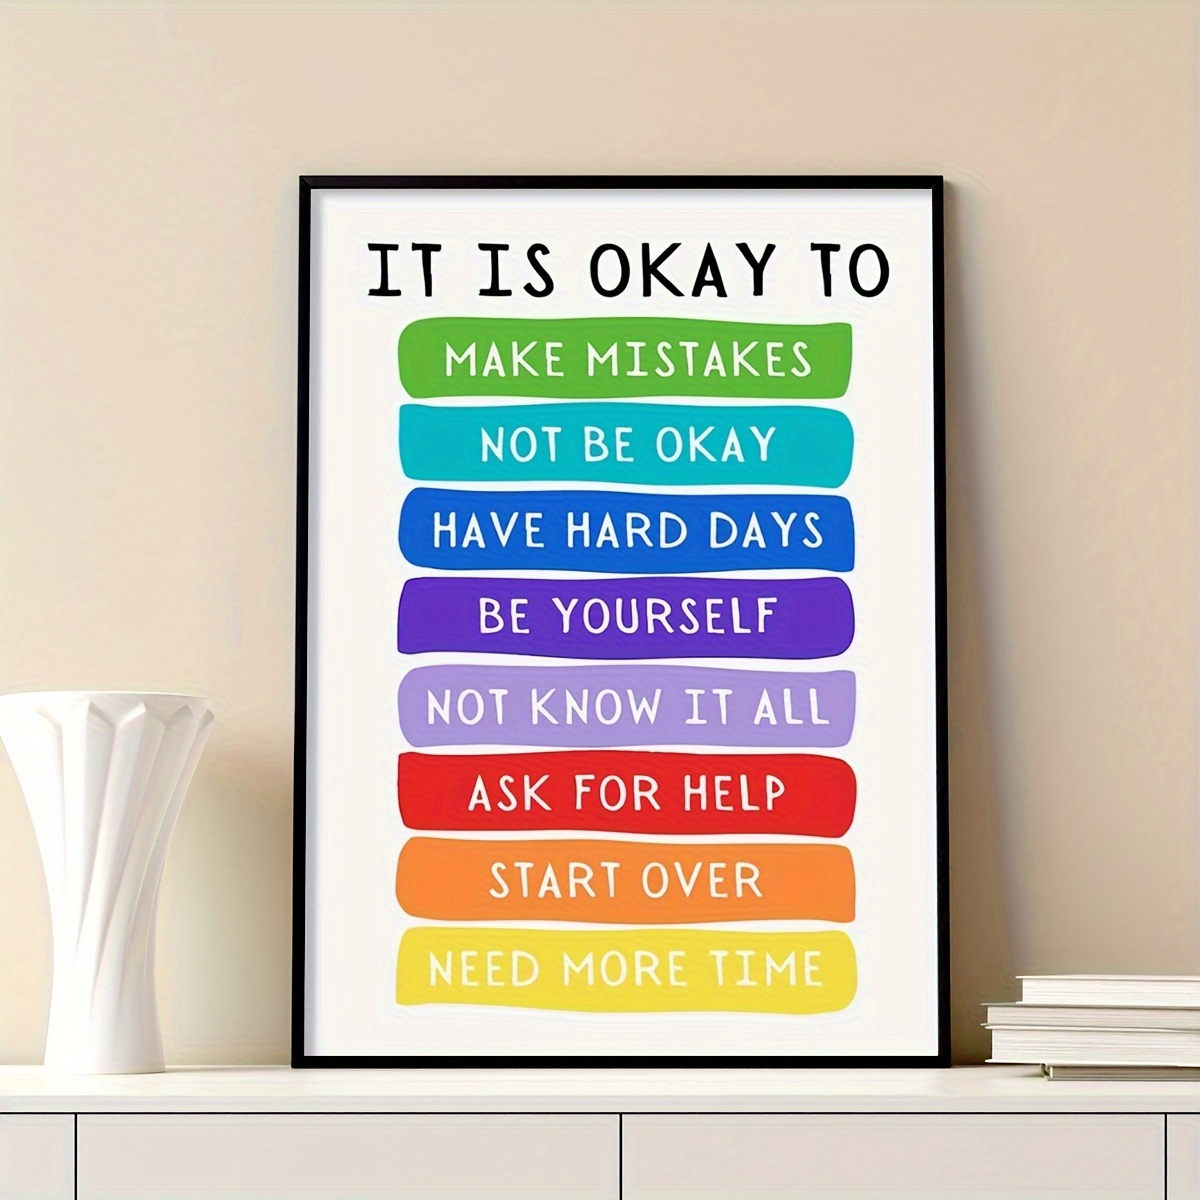 

1pc Bohemian Style Gender Neutral Rainbow Poster, Printed Canvas Painting Wall Art, Self-encouragement, Positive Psychological Message, It's Okay Bedroom Living Room Decor, Unframed